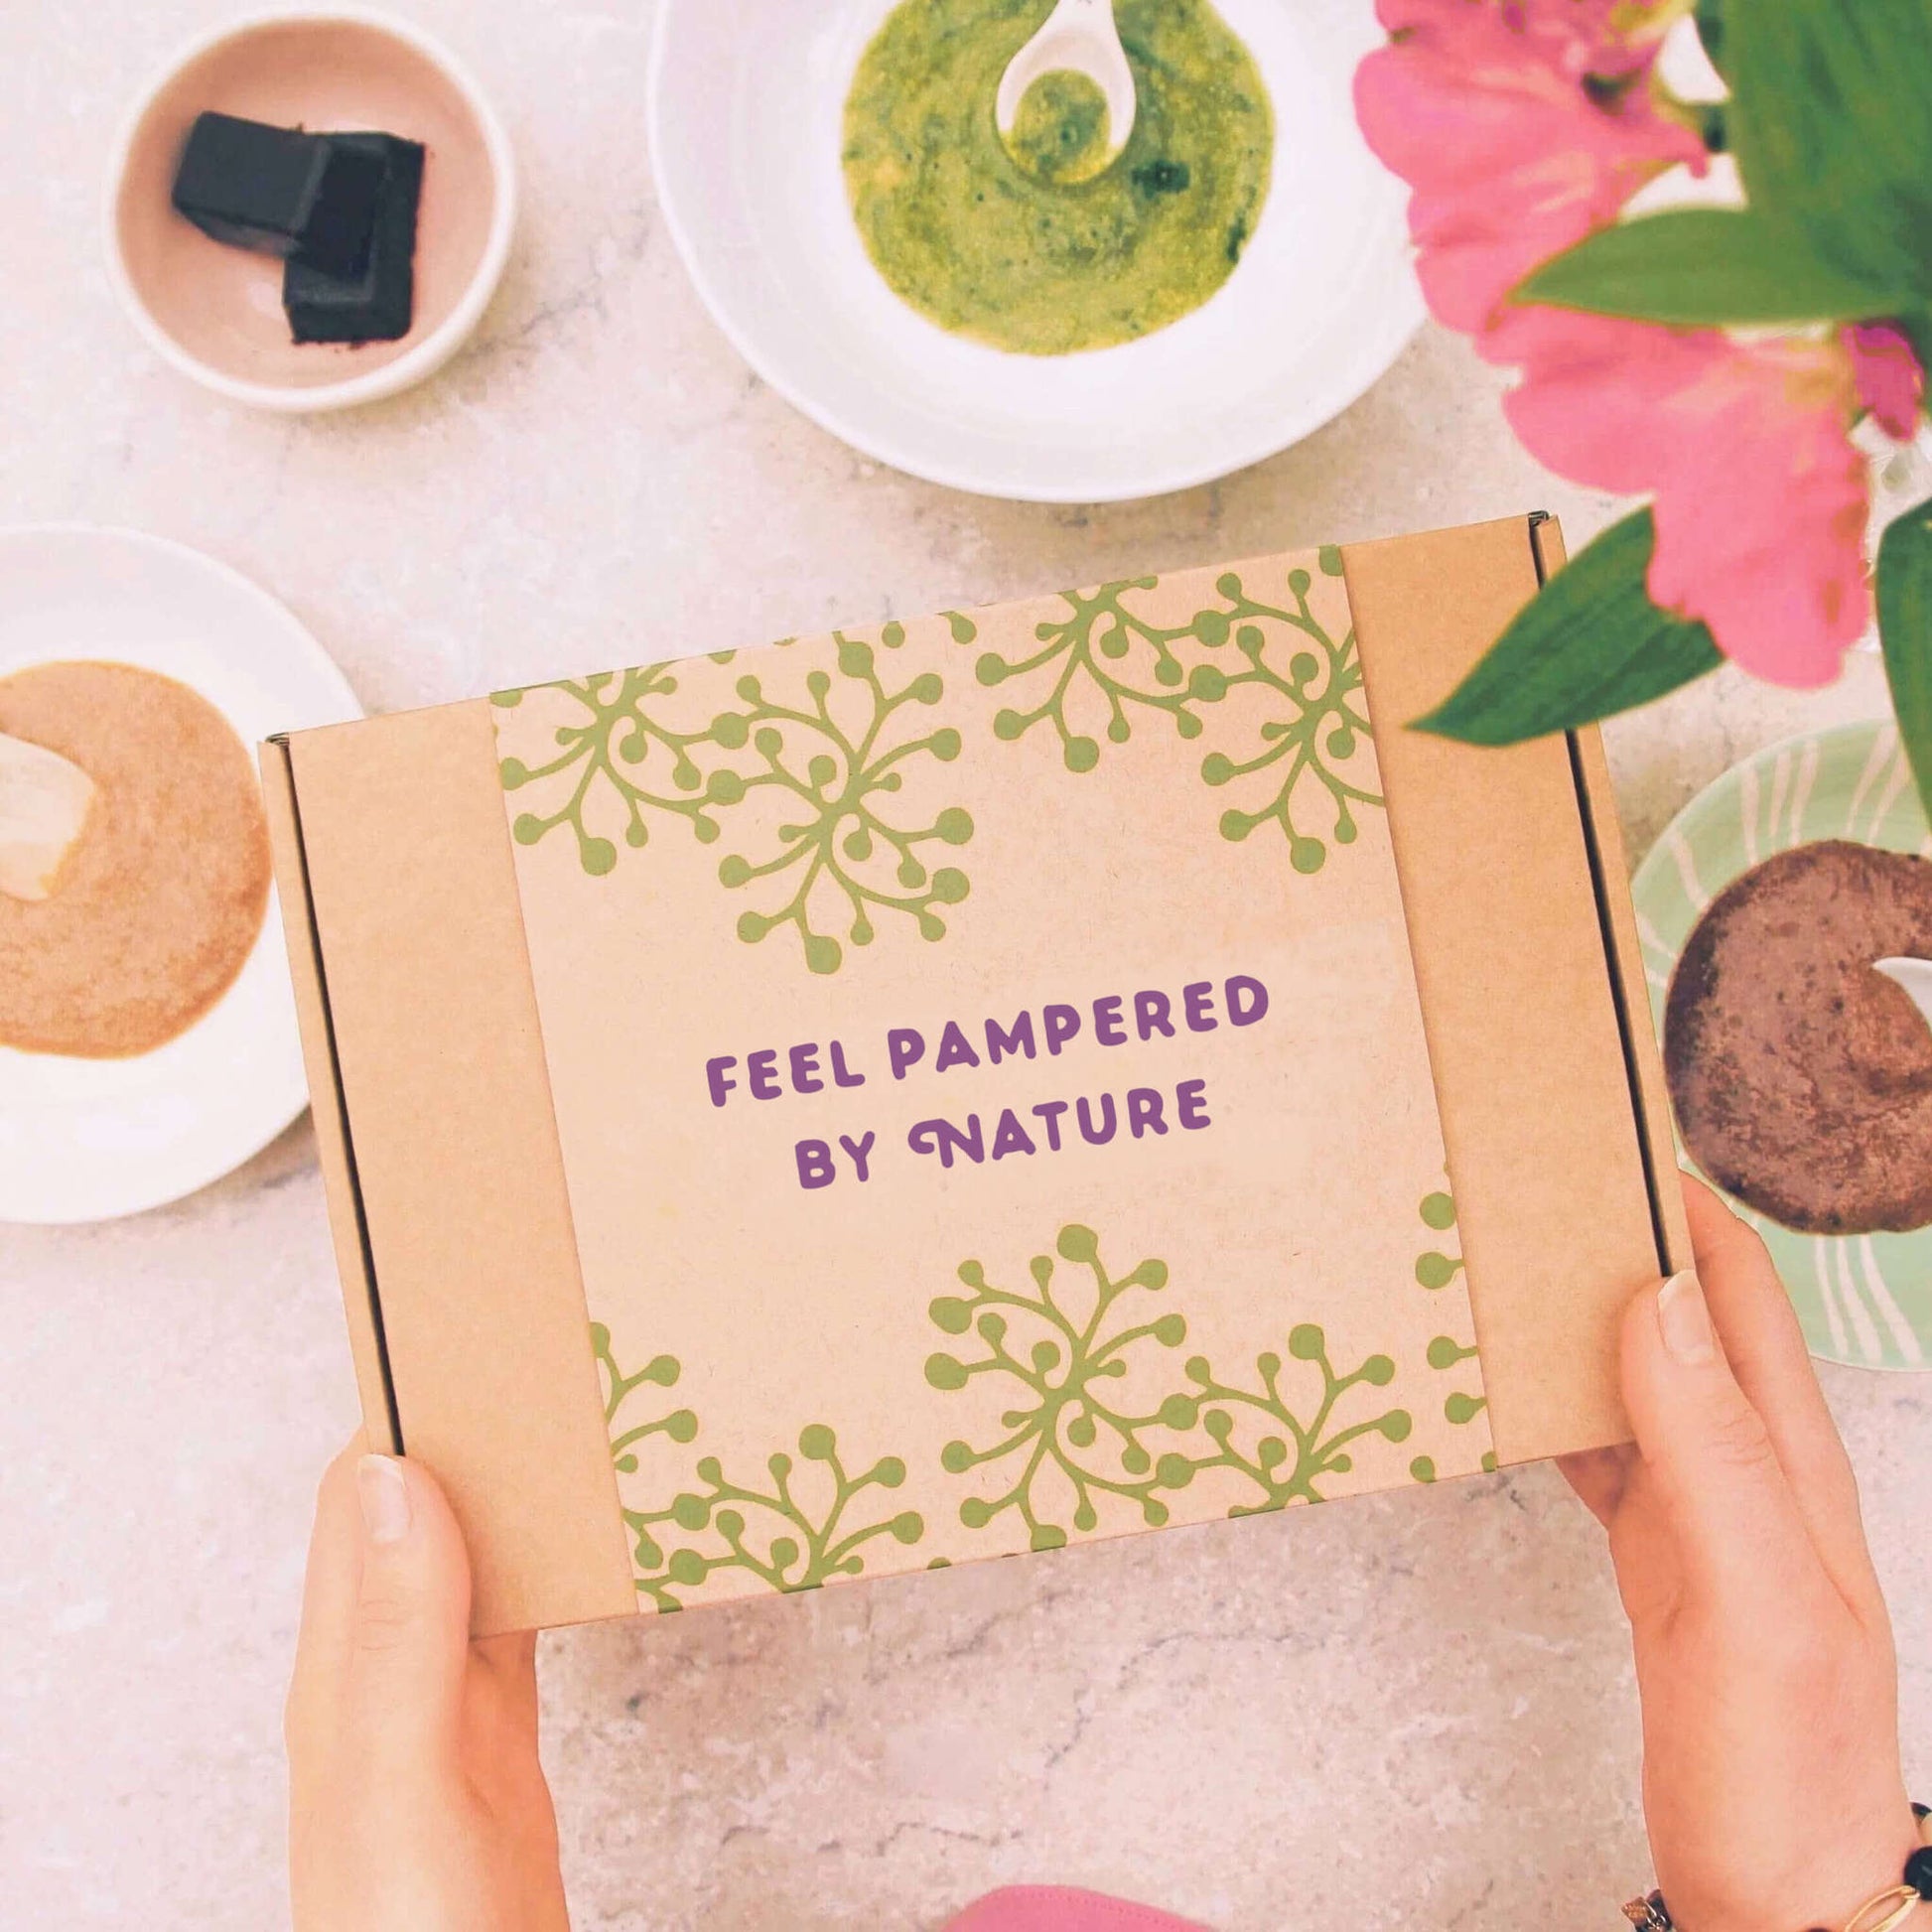 pamper letterbox gift with gift box design "feel pampered by nature"